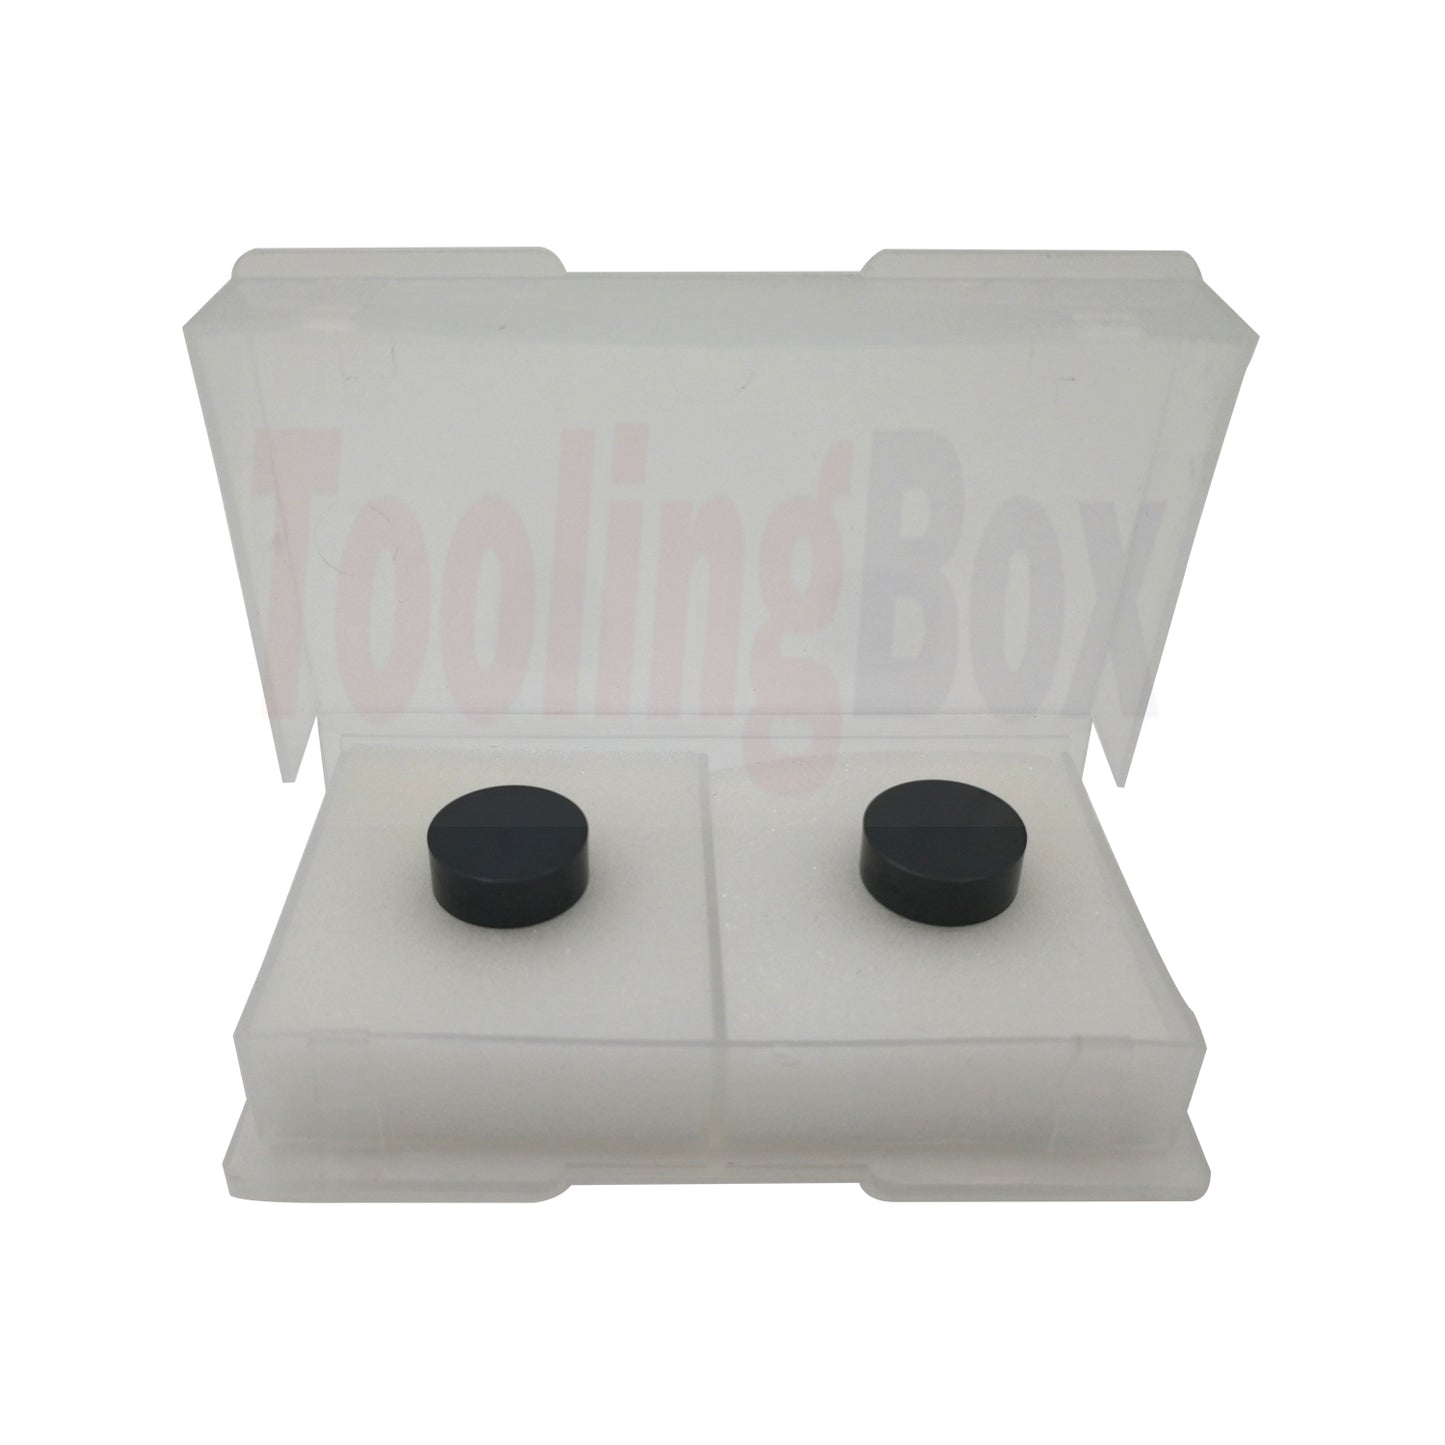 Solid CBN inserts RNMN090300E TB100 for grey cast iron finish milling - fits SECO milling cutters